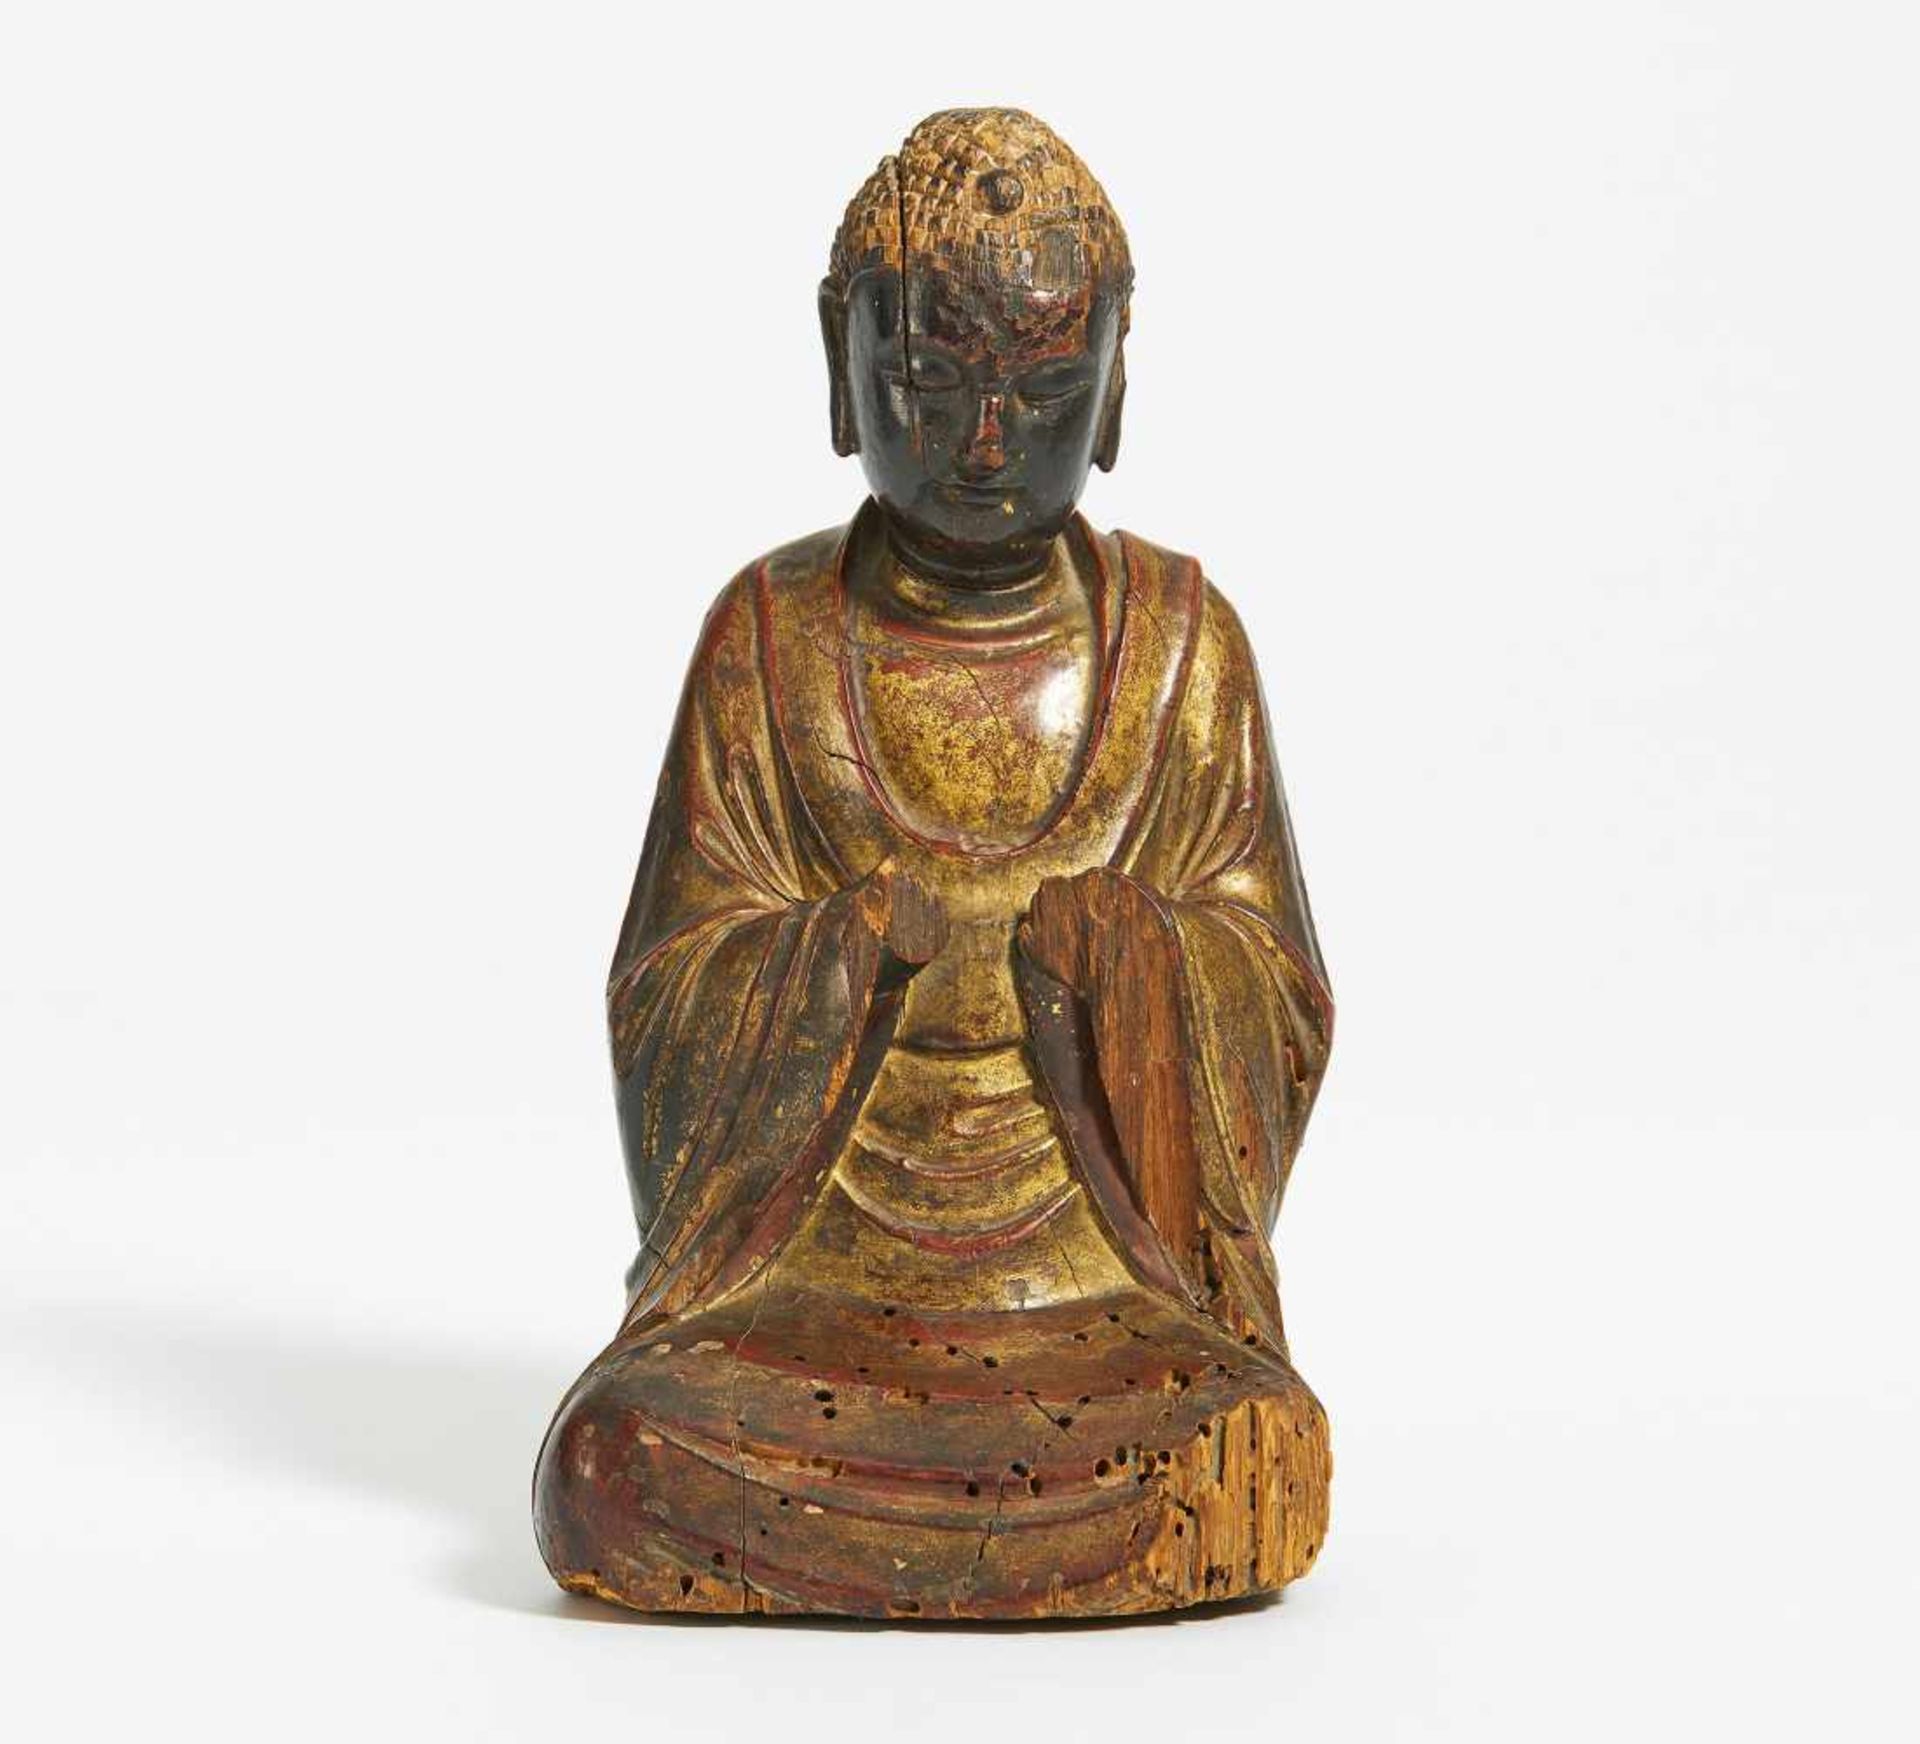 SEATED BUDDHA. Japan. 19th/20th c. Wood with residue of lacquer. H.19.8cm. Condition B.